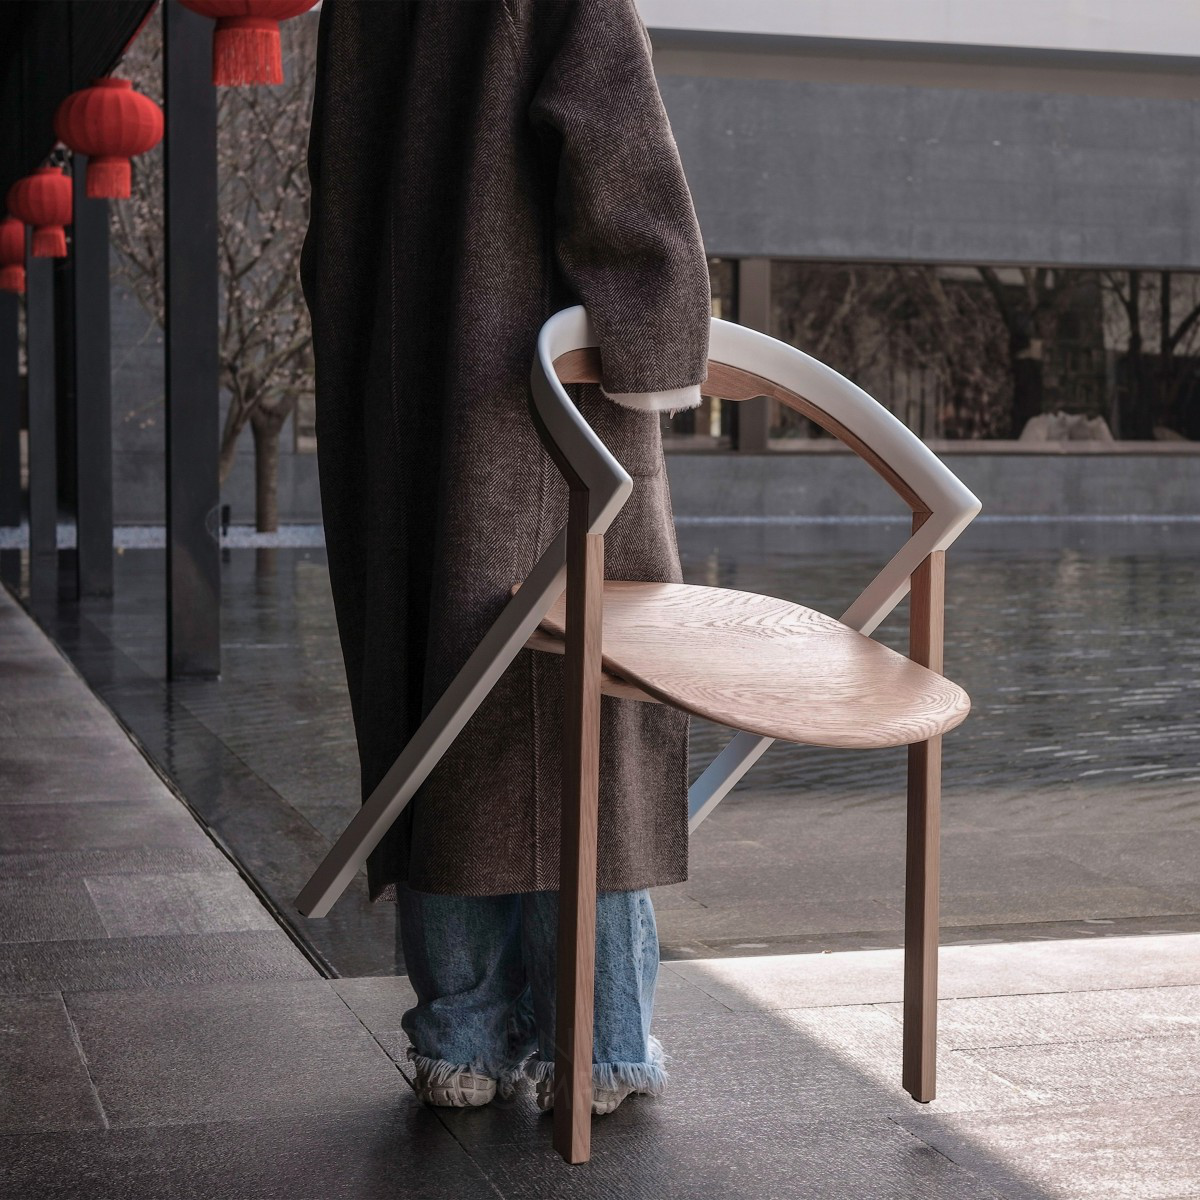 Ming-Li Chang wins Silver at the prestigious A' Furniture Design Award with Lotus Guest Chair.